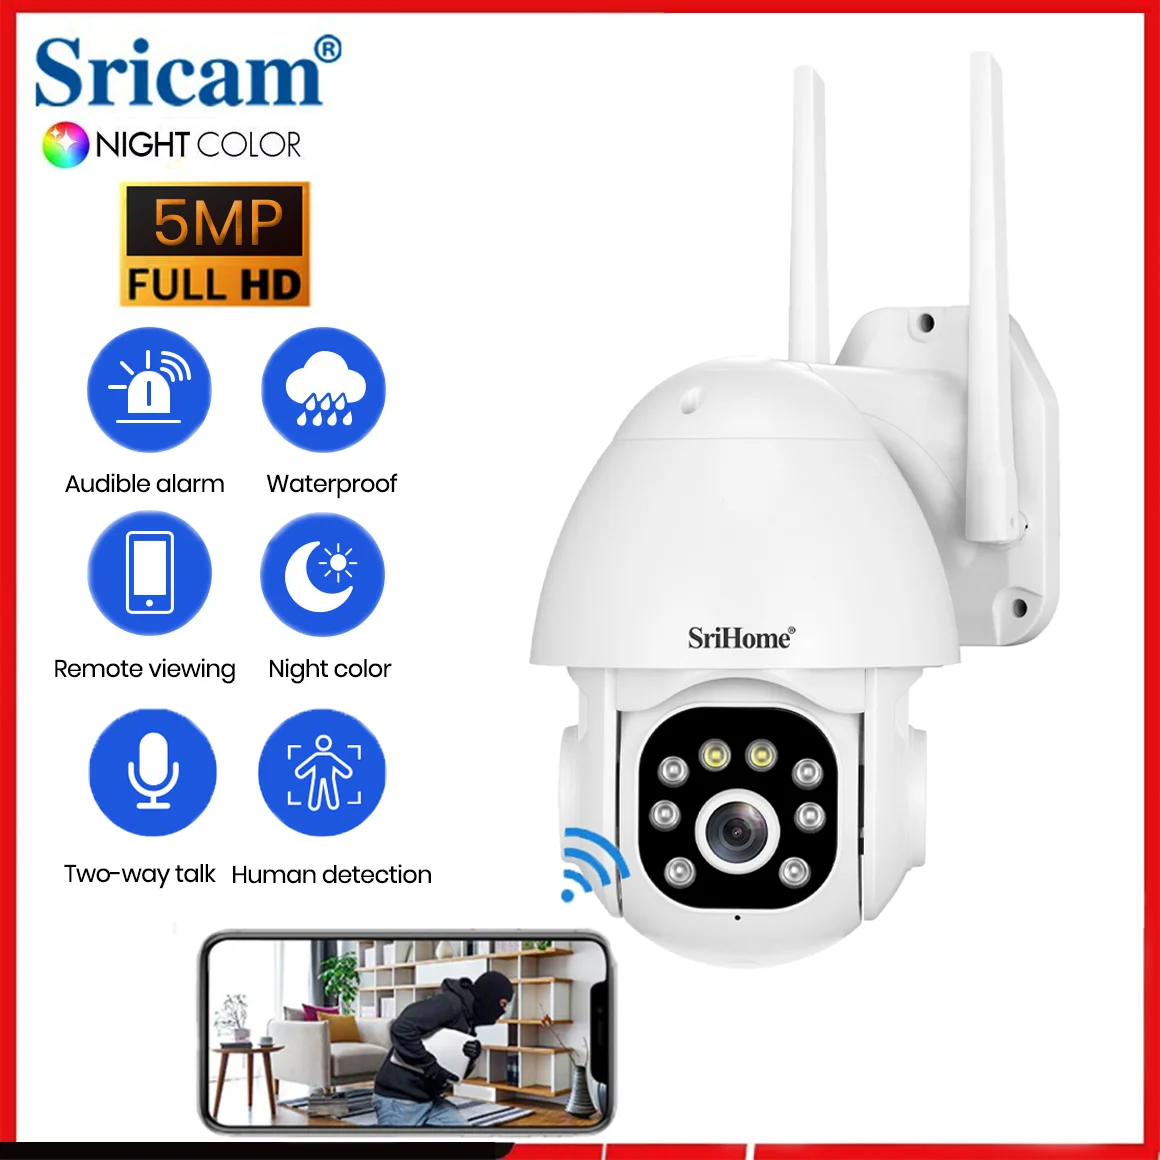 Sricam SP039 Surveillance Cameras With Wifi Security Protection Security Wireless Outdoor ip Camera Wifi Surveillance Cameras